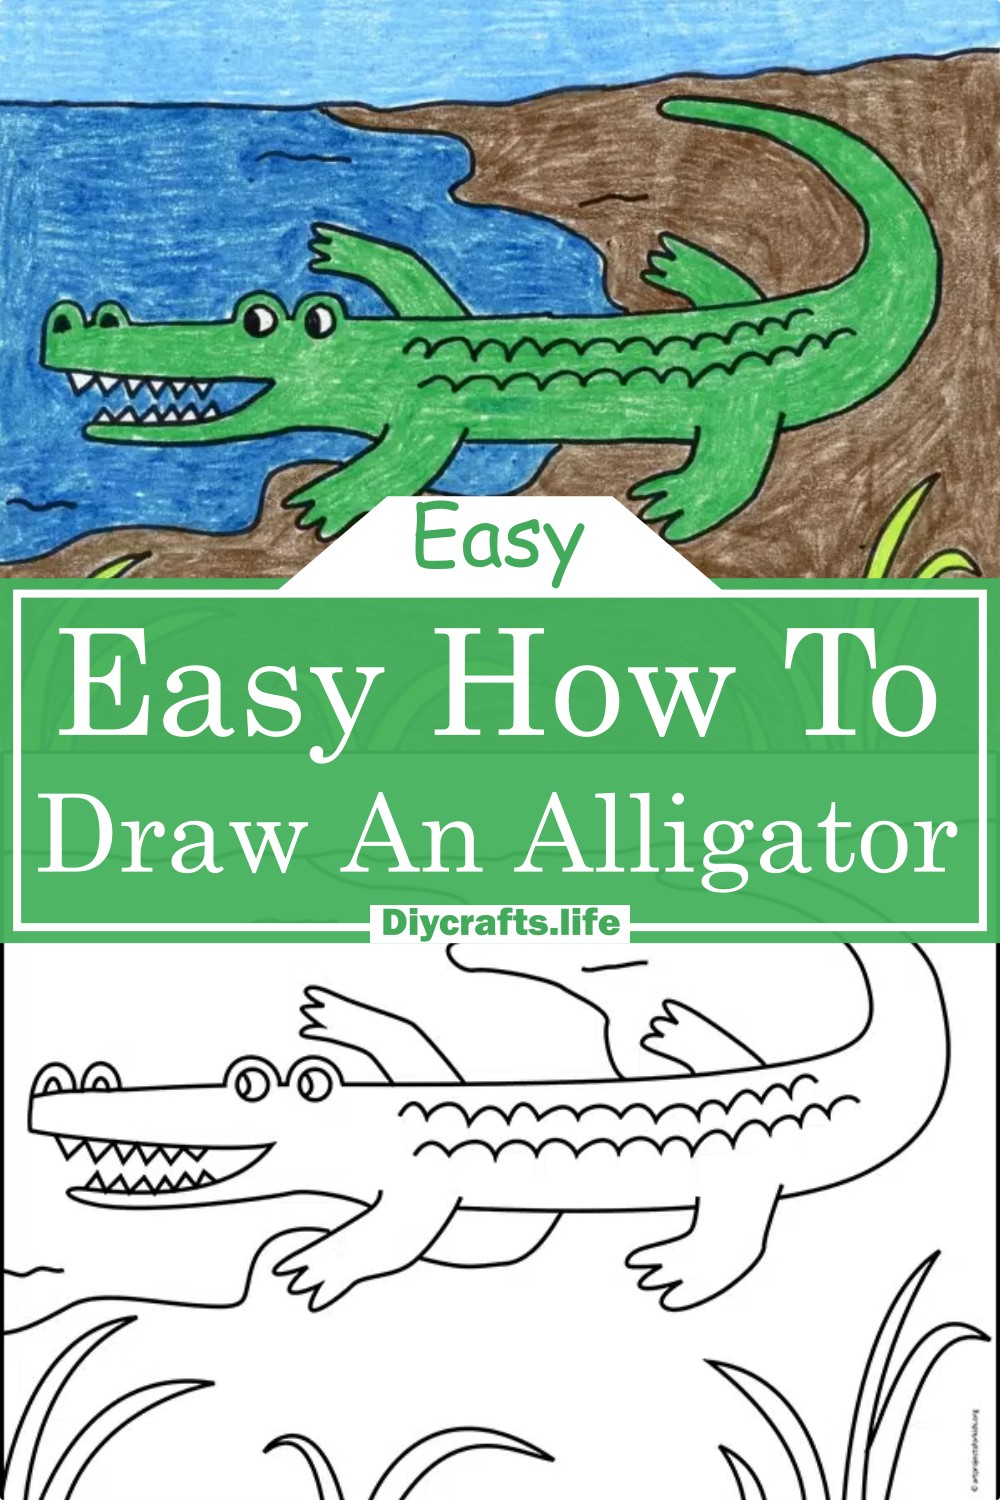 Easy How To Draw An Alligator